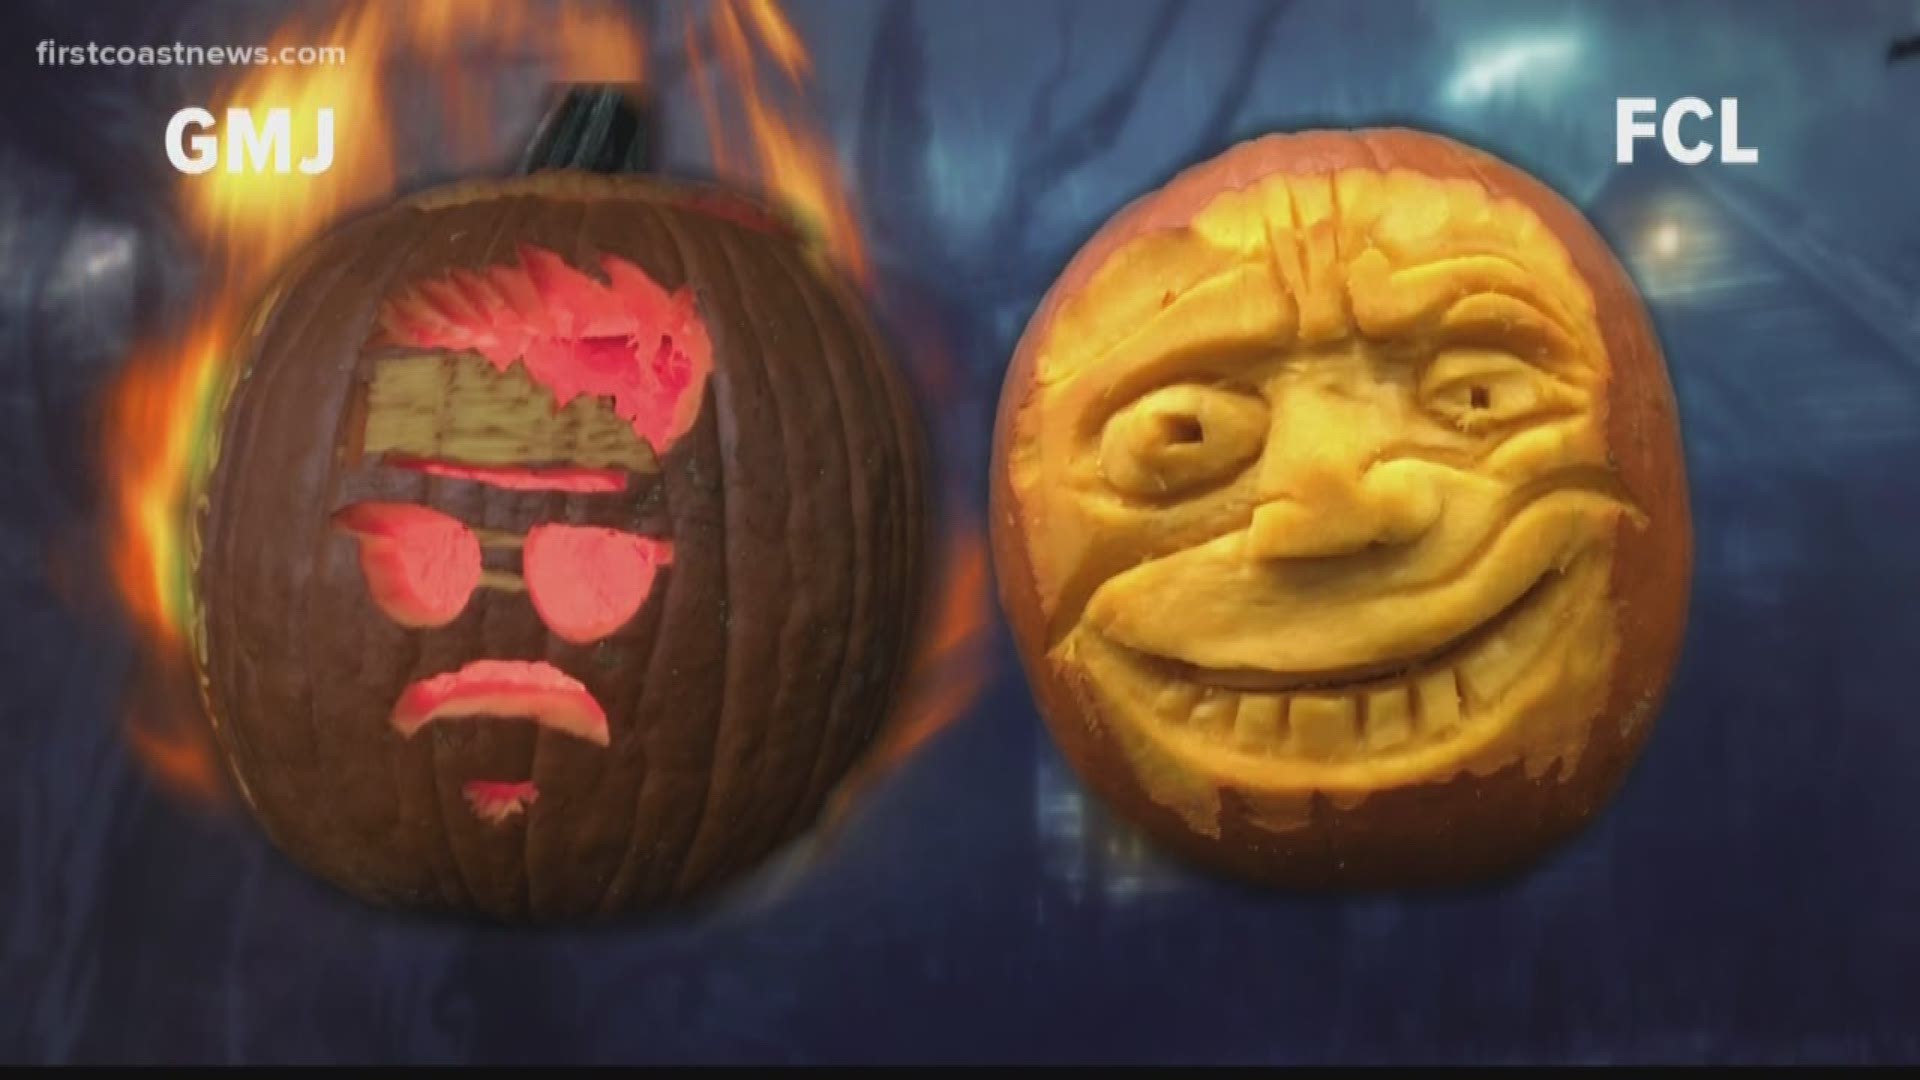 It was a hard-fought battle between First Coast News and First Coast Living for the Pumpkin Battle of 2019 but in the end, it was #MinshewMania that swept it.